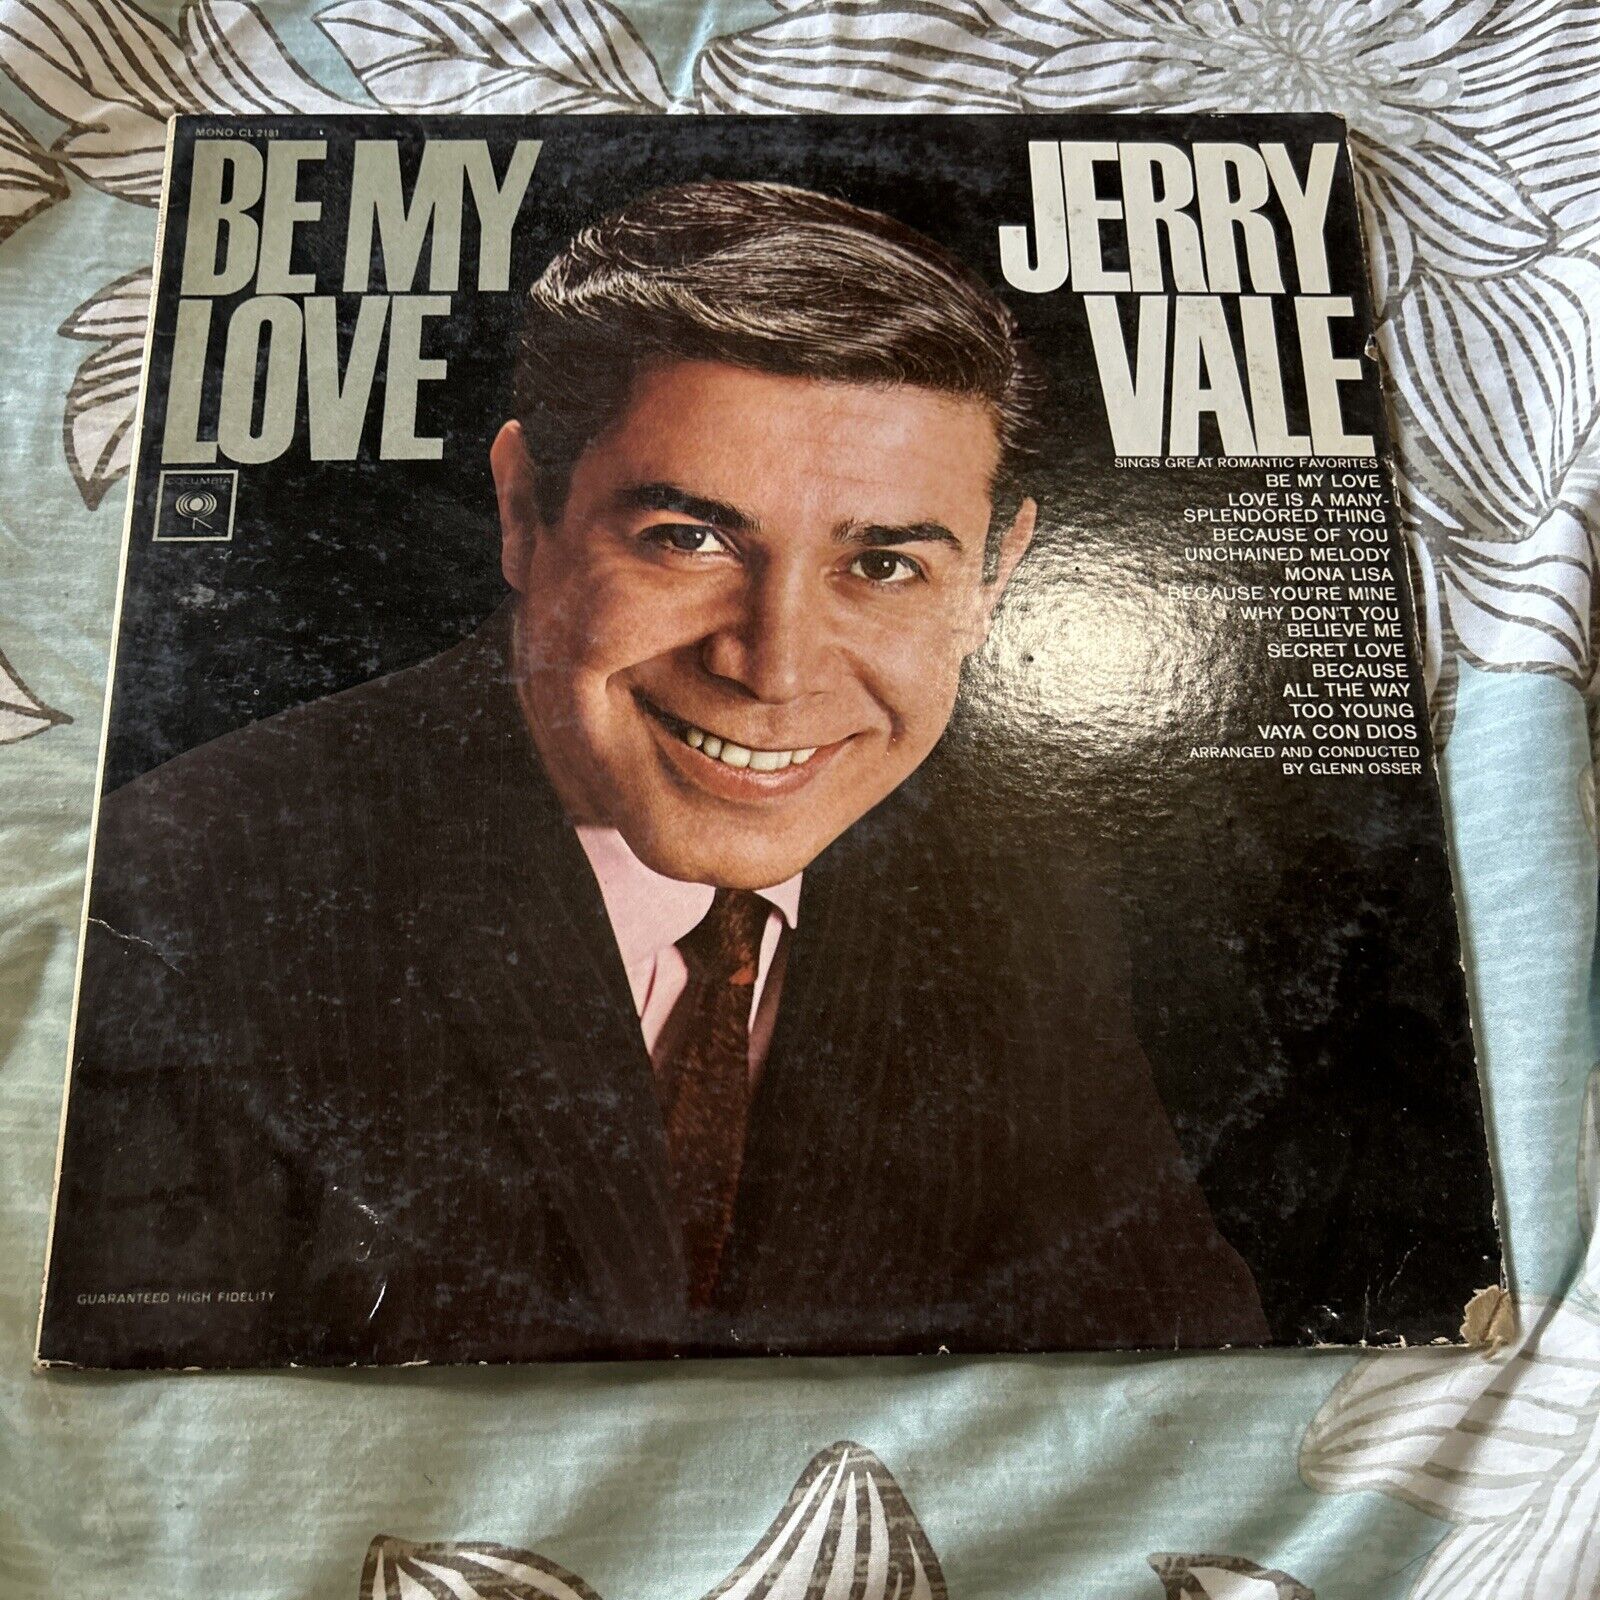 “Be My Love” By Jerry Vale Vinyl Record MONO-CL 2181